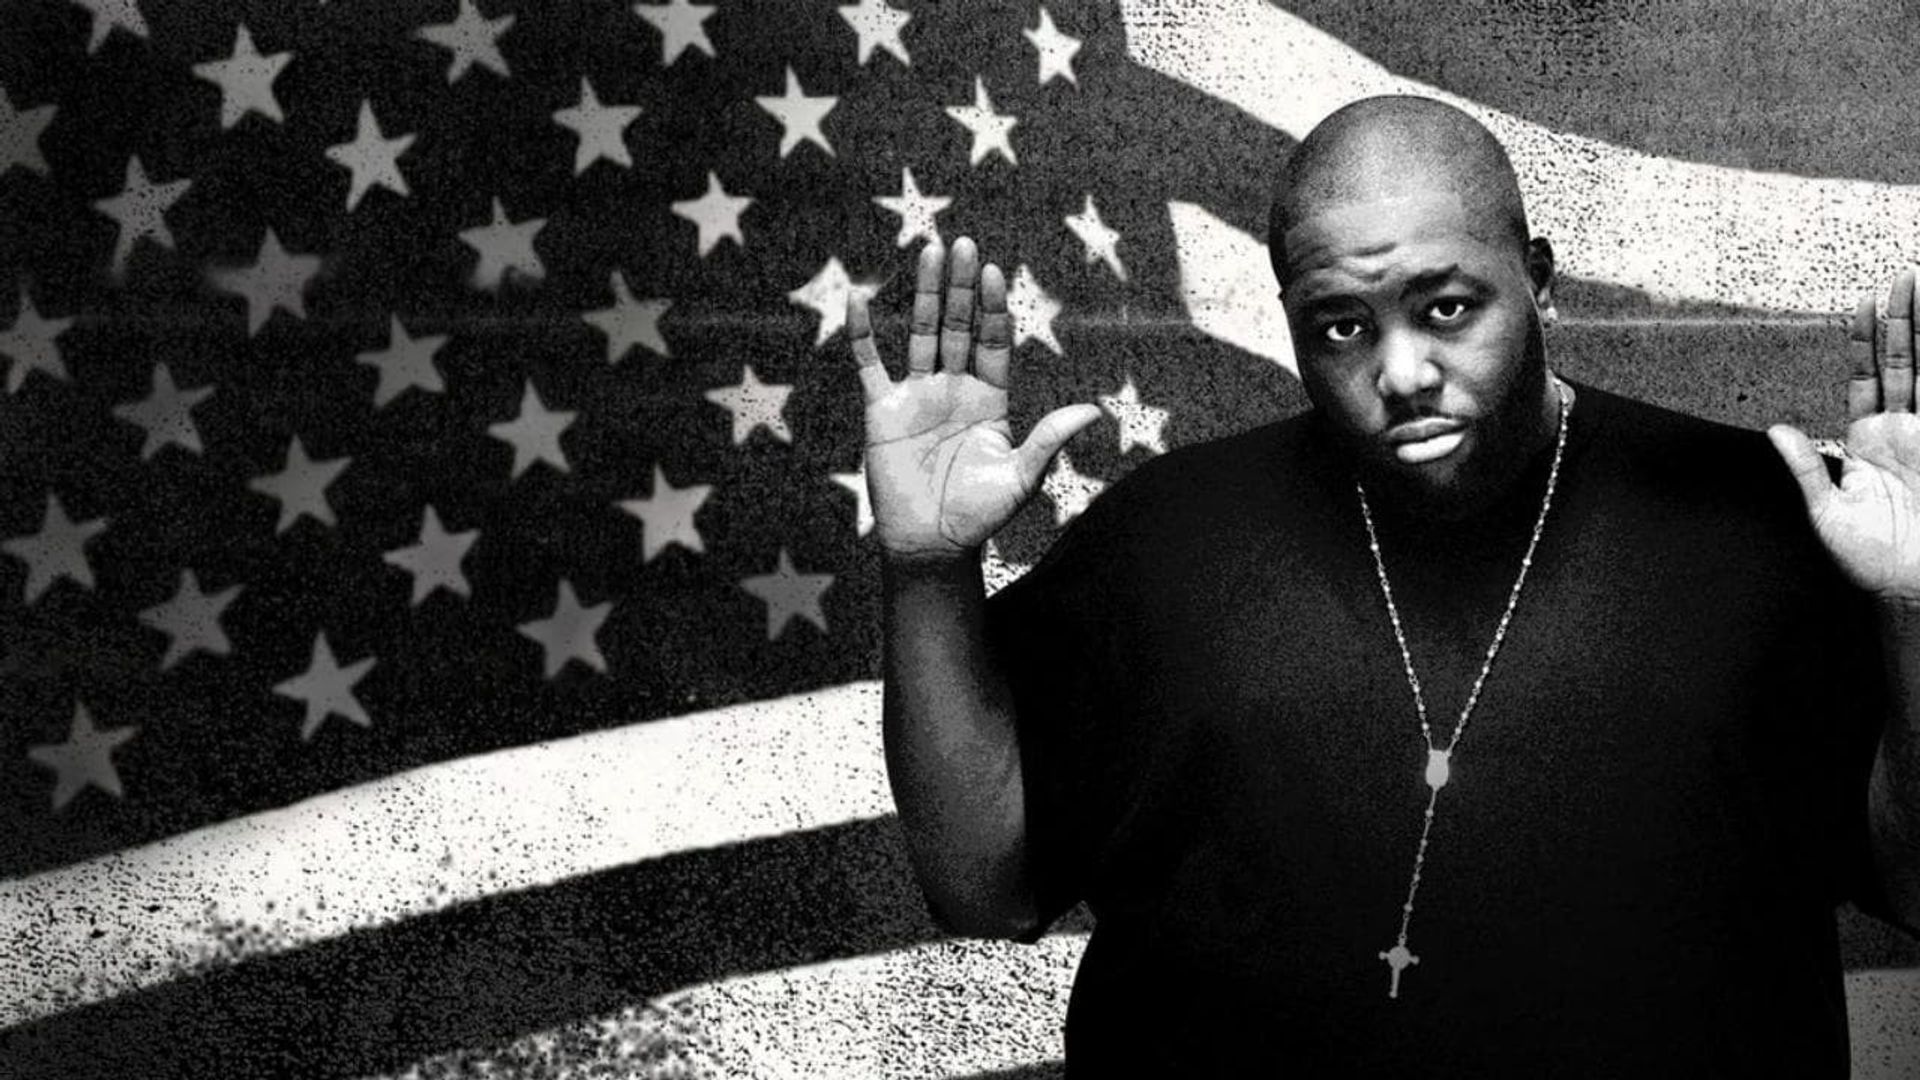 Trigger Warning with Killer Mike background